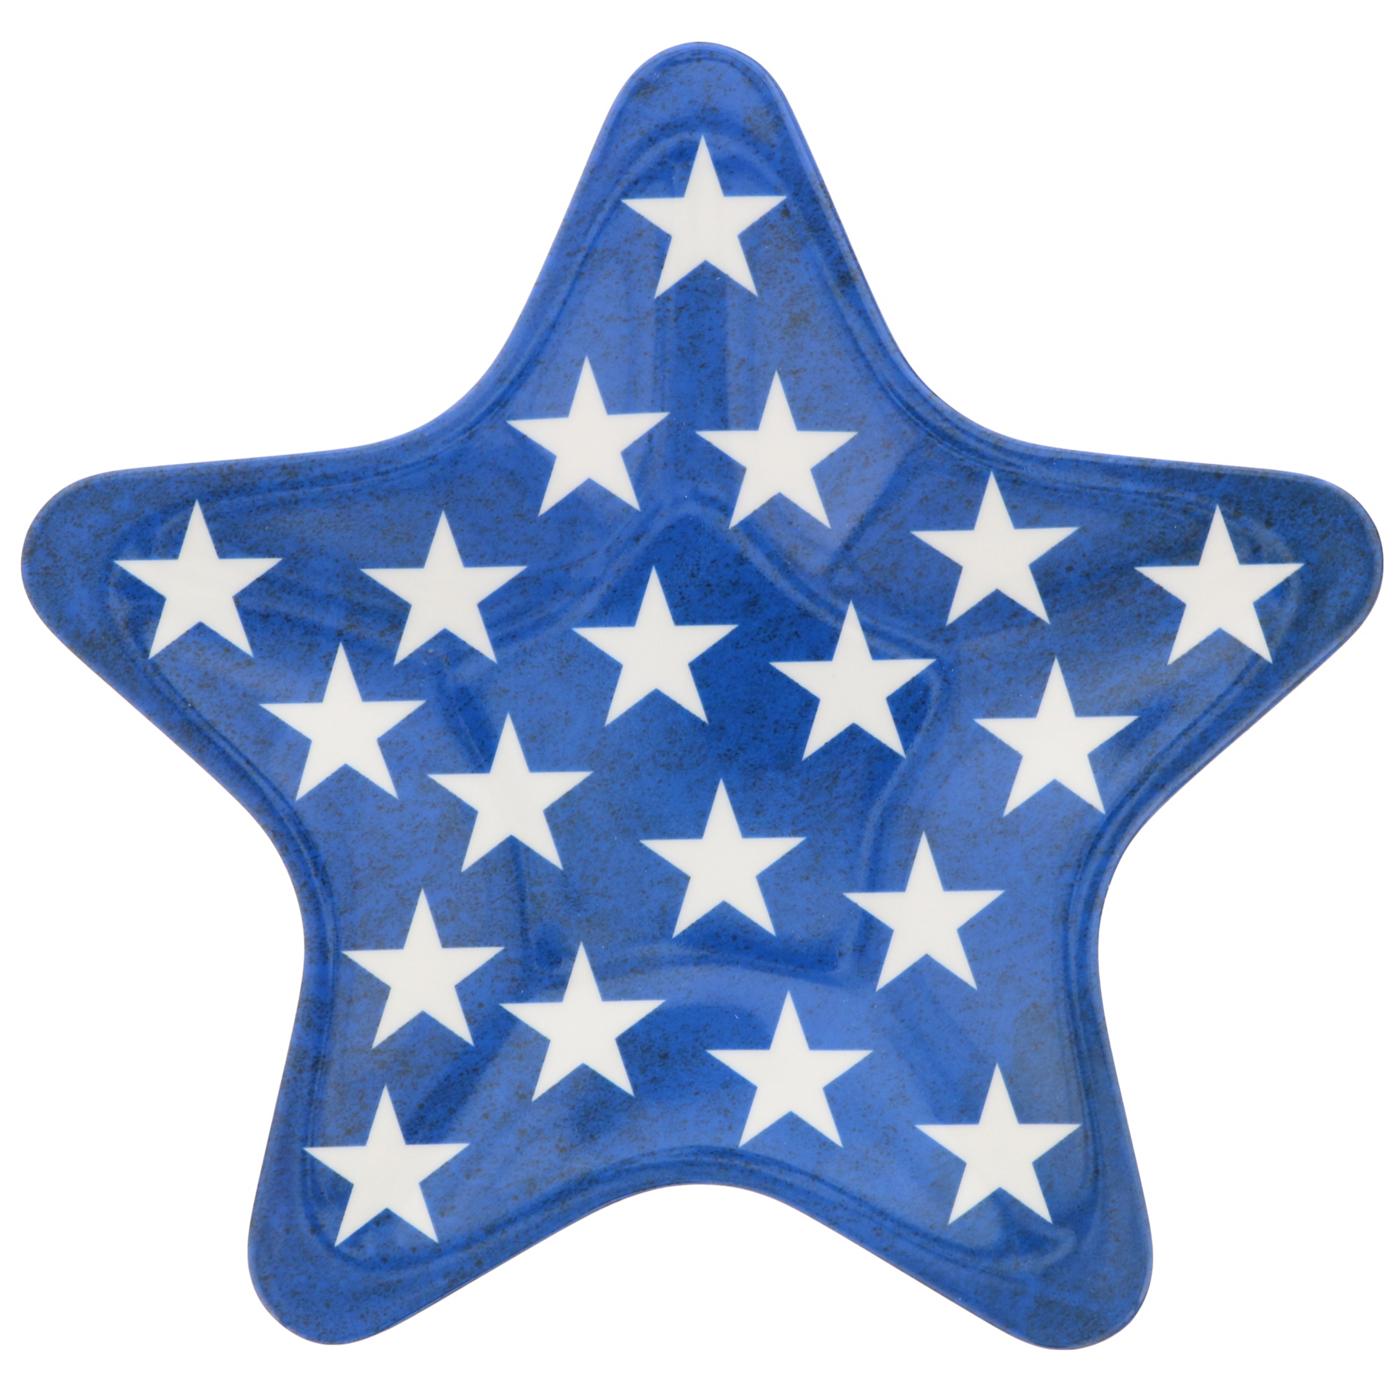 Dining Style Star Shaped Appetizer Plates, Assorted; image 2 of 2